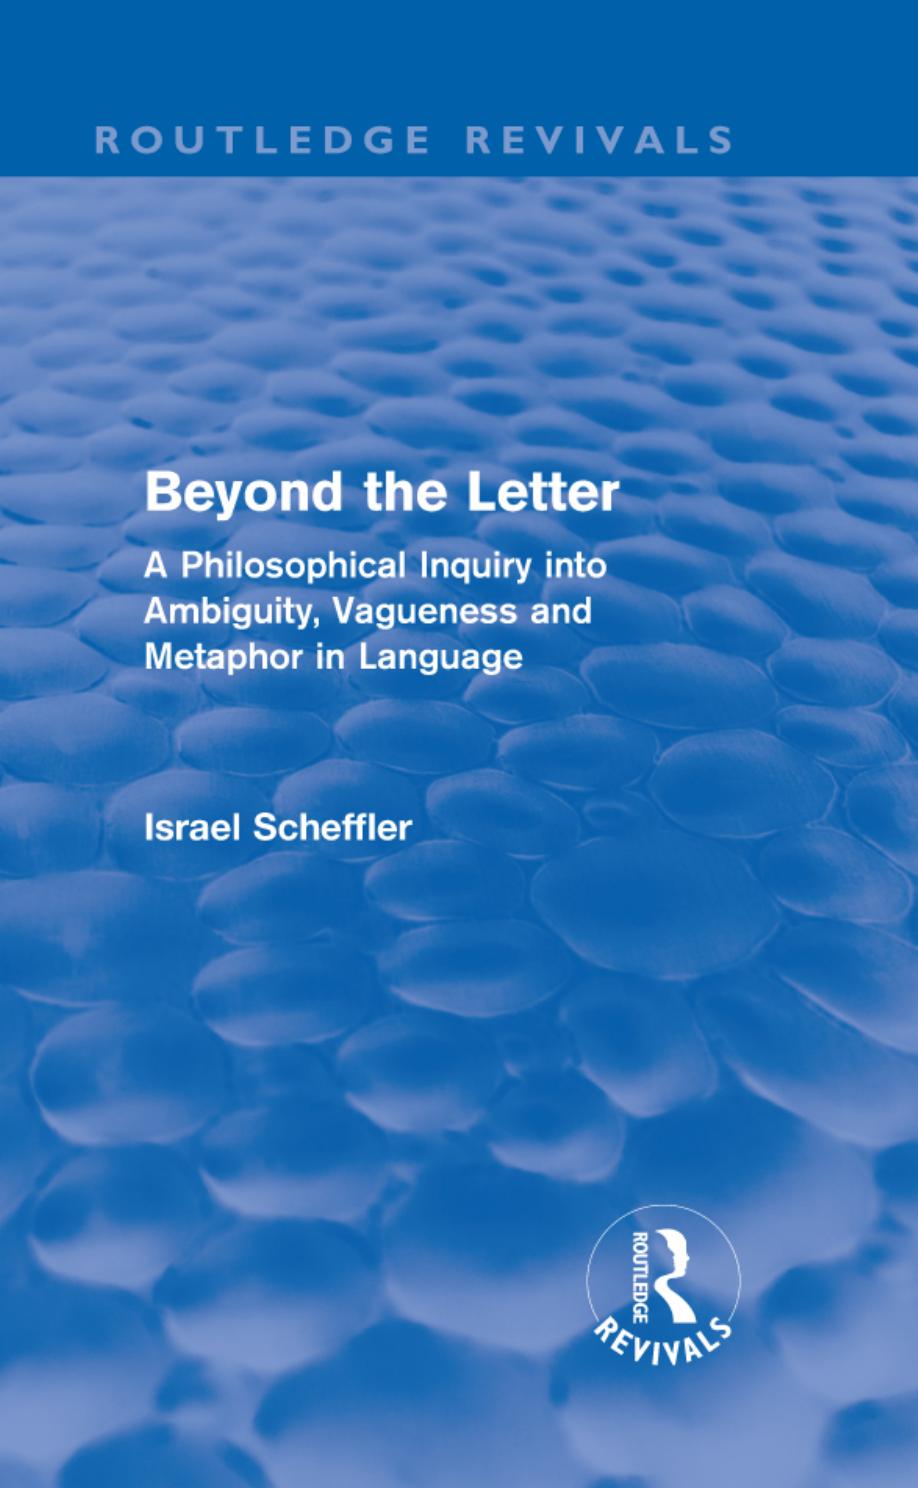 Beyond the Letter: A Philosophical Inquiry Into Ambiguity, Vagueness, and Metaphor in Language